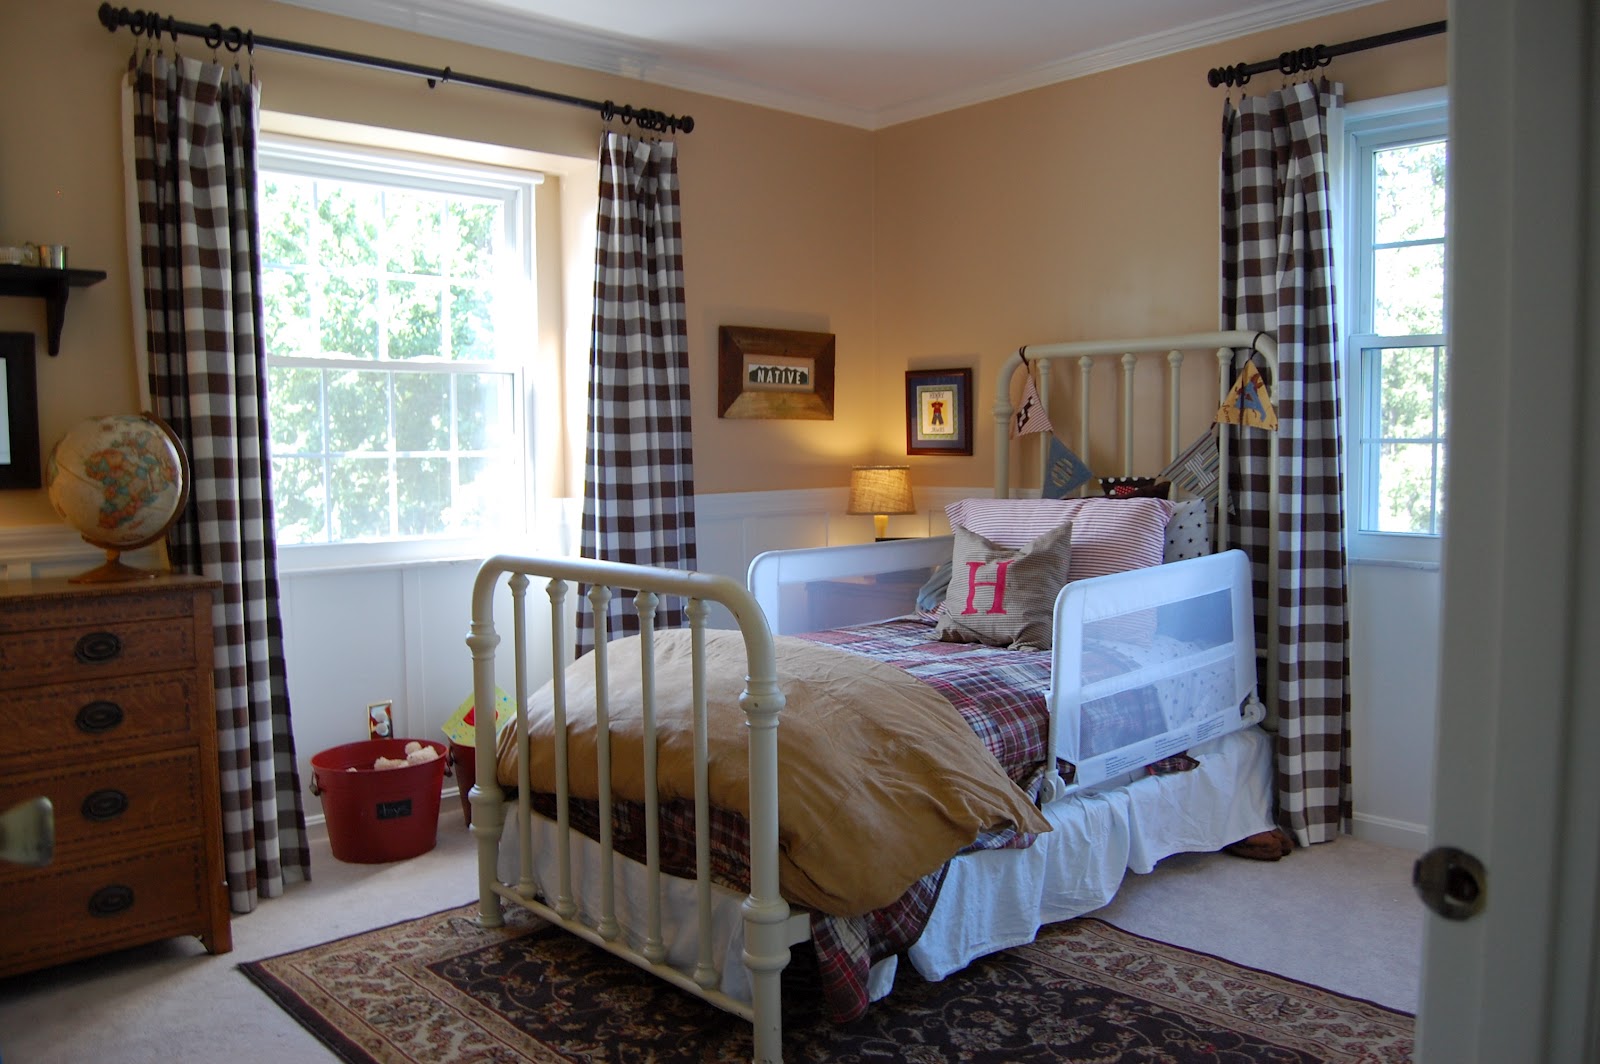 Buffalo Check Curtains From Pottery Barn Kids Are So Cute In Here